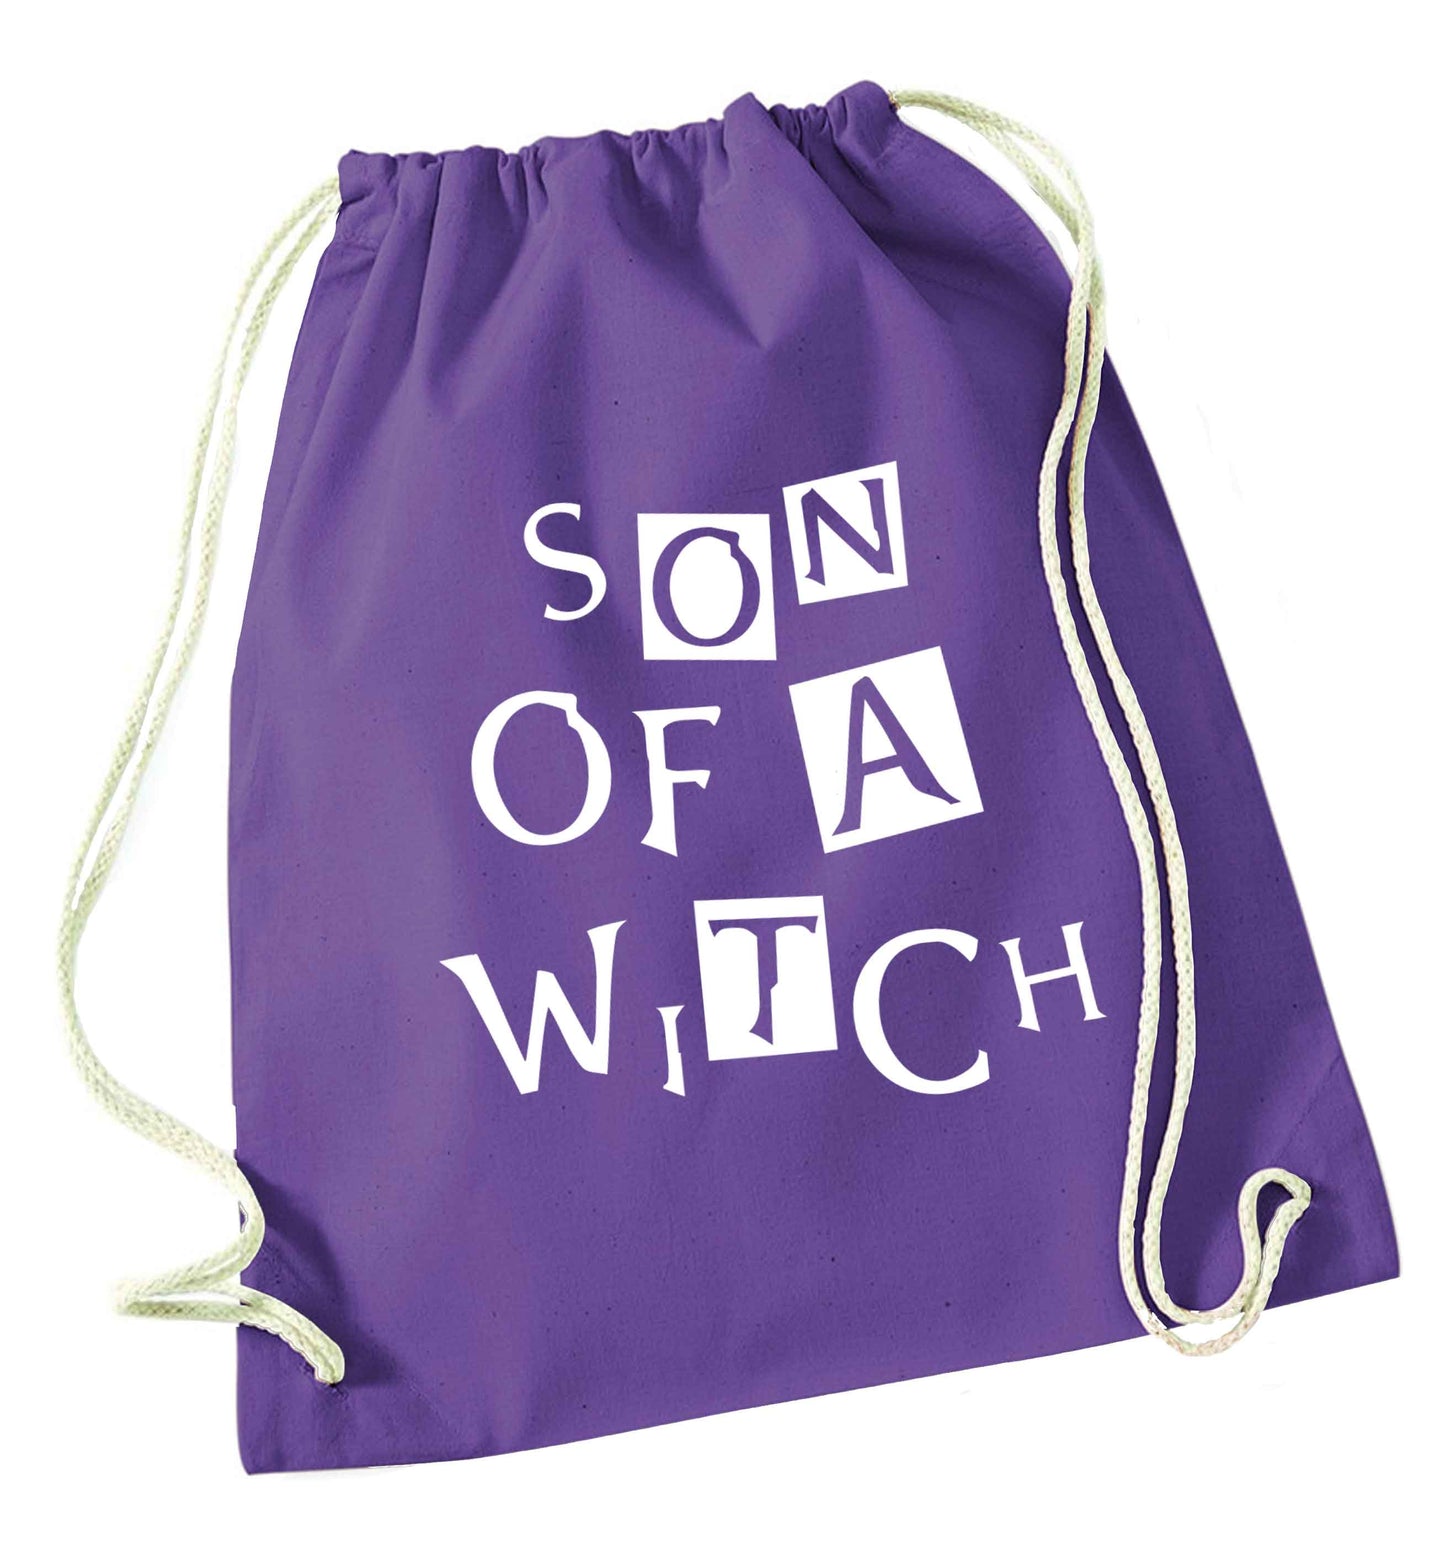 Son of a witch purple drawstring bag